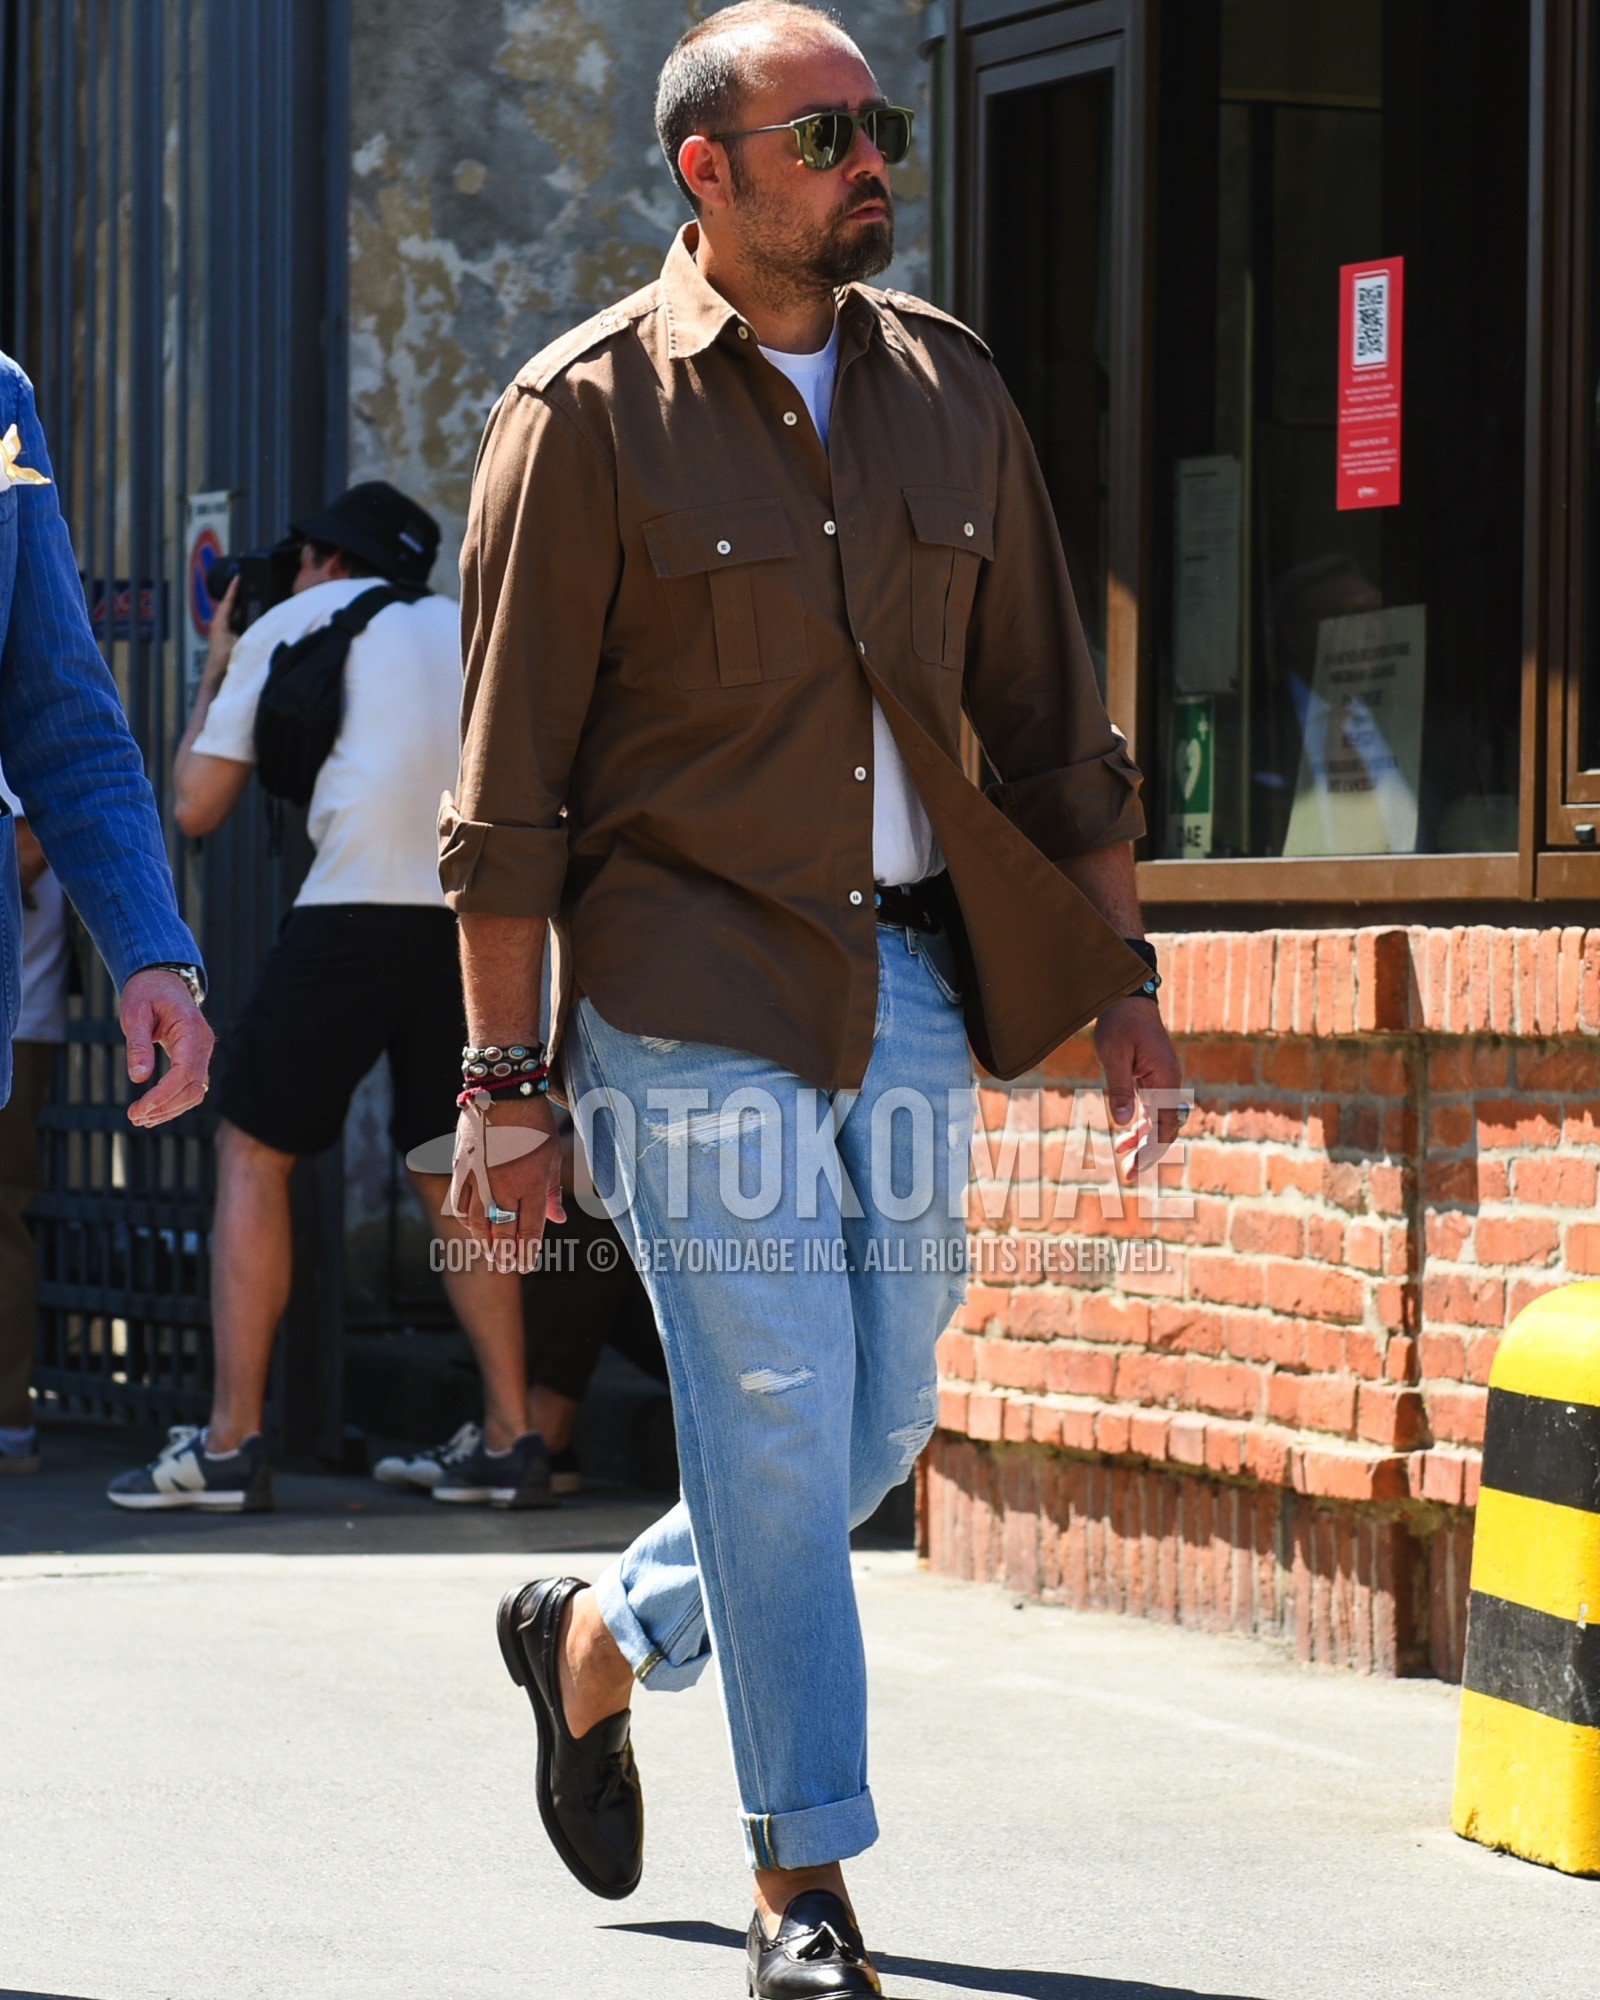 Men's spring summer outfit with olive green plain sunglasses, brown plain military jacket, brown plain shirt jacket, white plain t-shirt, black plain leather belt, blue plain damaged jeans, black tassel loafers leather shoes.